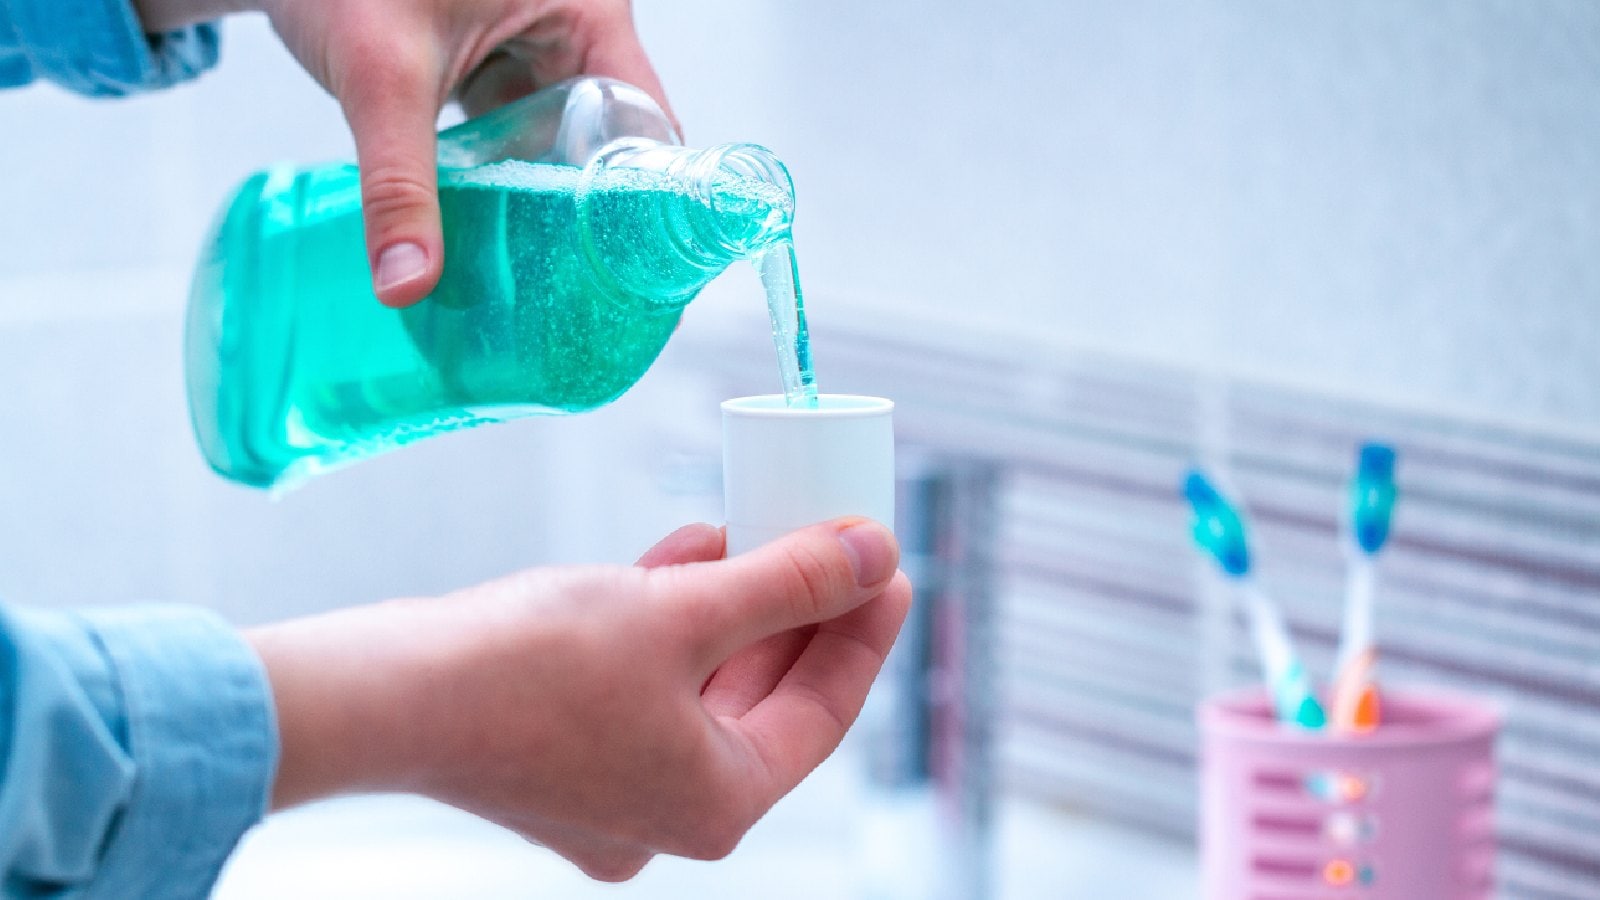 Is it safe to use mouthwash every day?